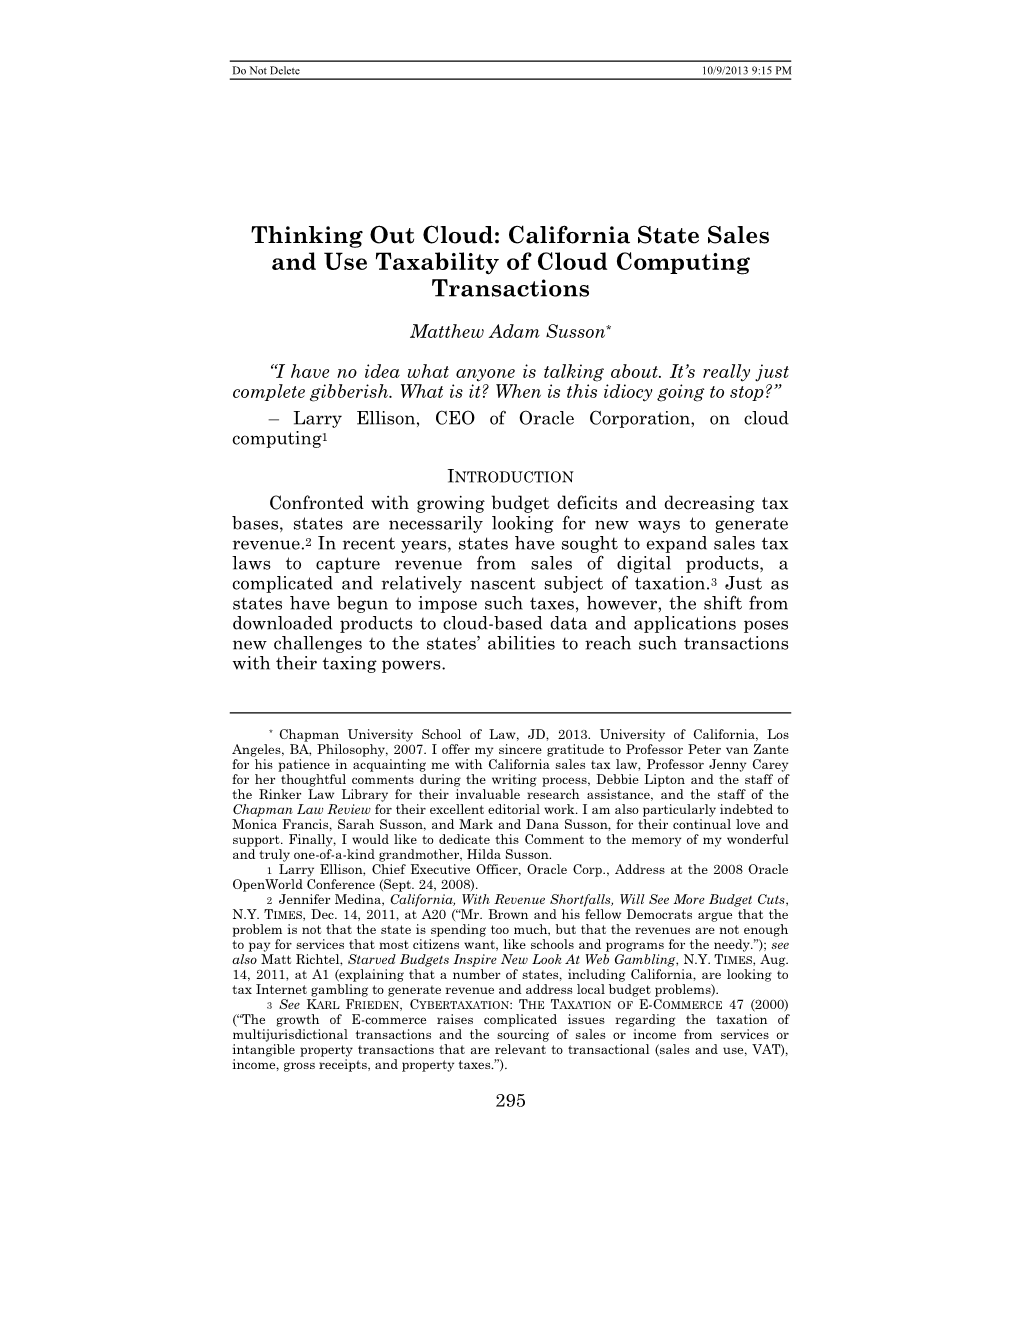 California State Sales and Use Taxability of Cloud Computing Transactions